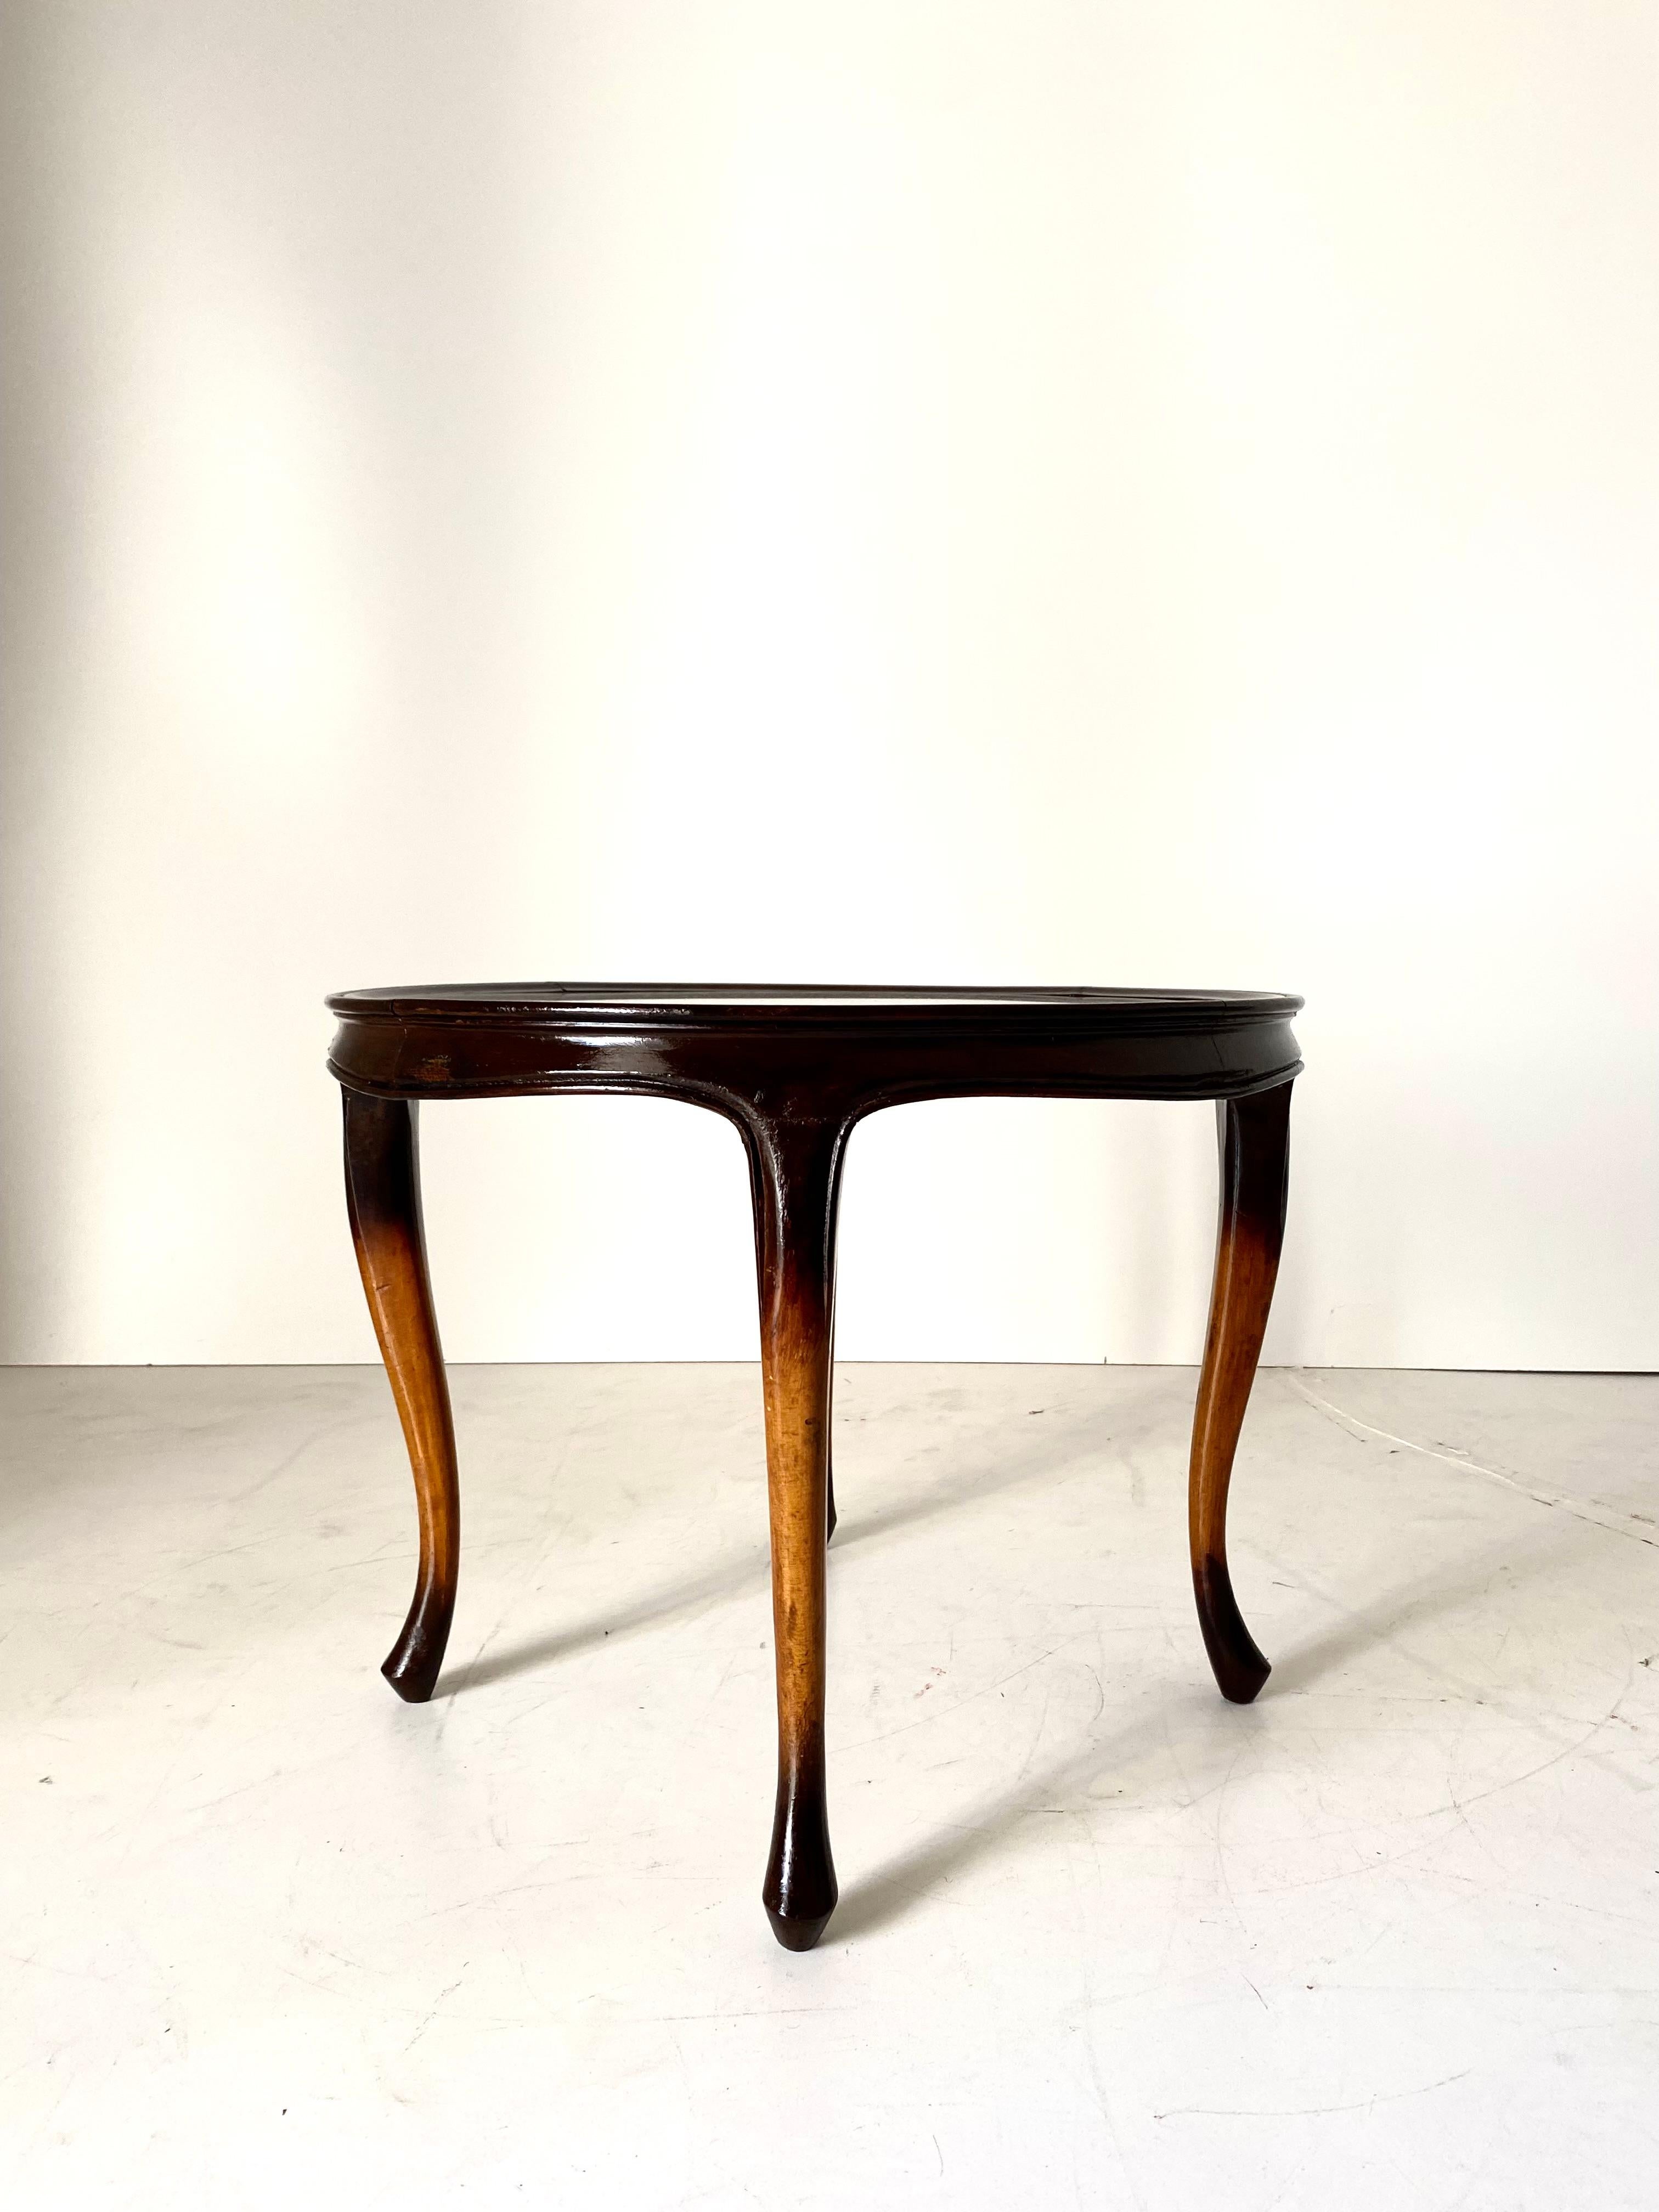 Art Deco wood coffee Table, France, early 1940s.
An elegant 1940s Art Deco side table with glass top and solid wood curved wood structure. Wood has been restored and polished,
In very good conditions with only few signs of time.